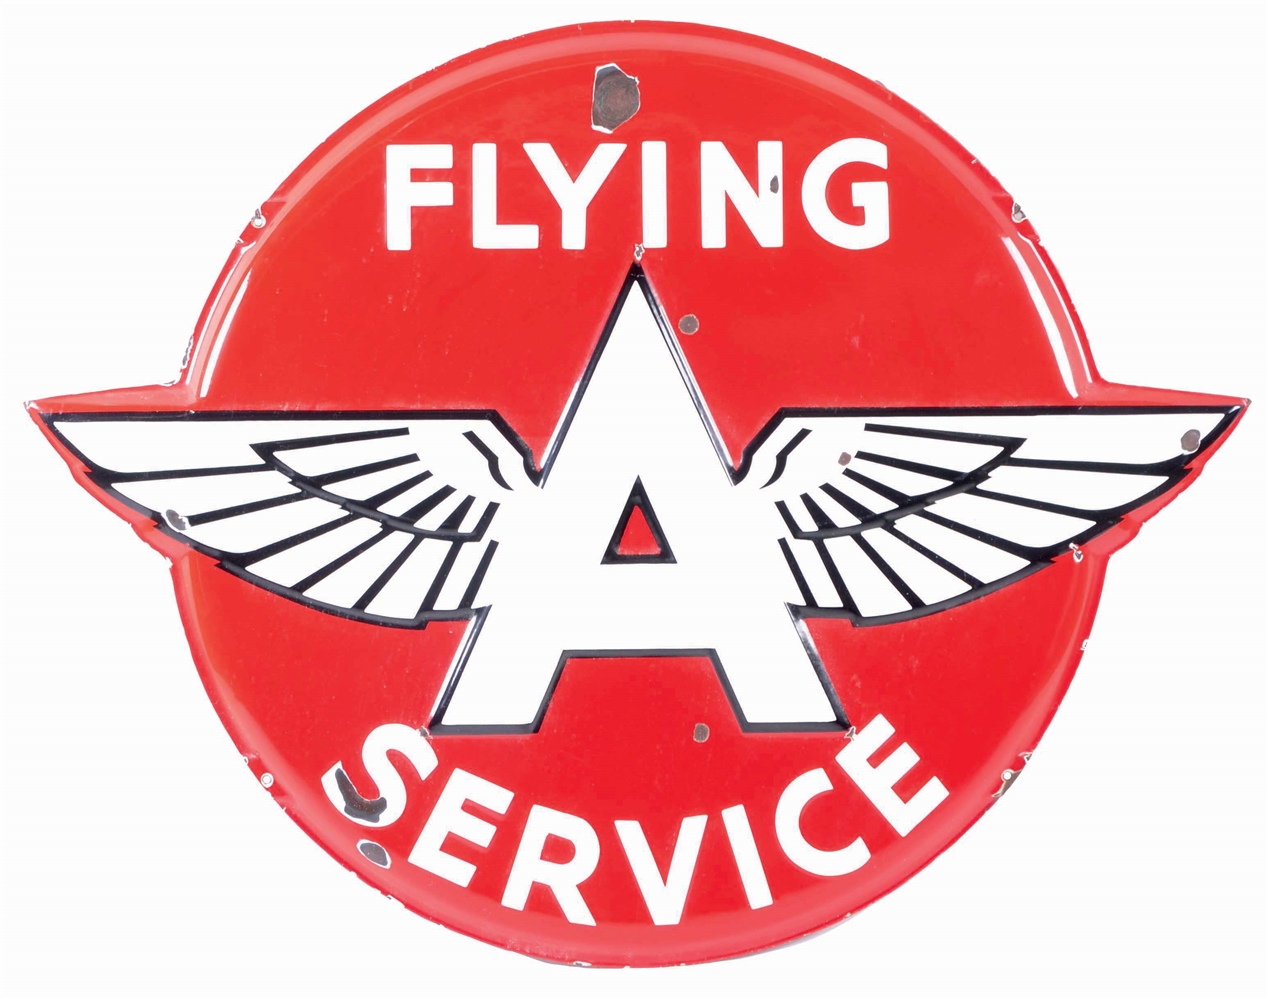 FLYING A SERVICE DIE CUT EMBOSSED PORCELAIN SIGN W/ WING GRAPHIC.